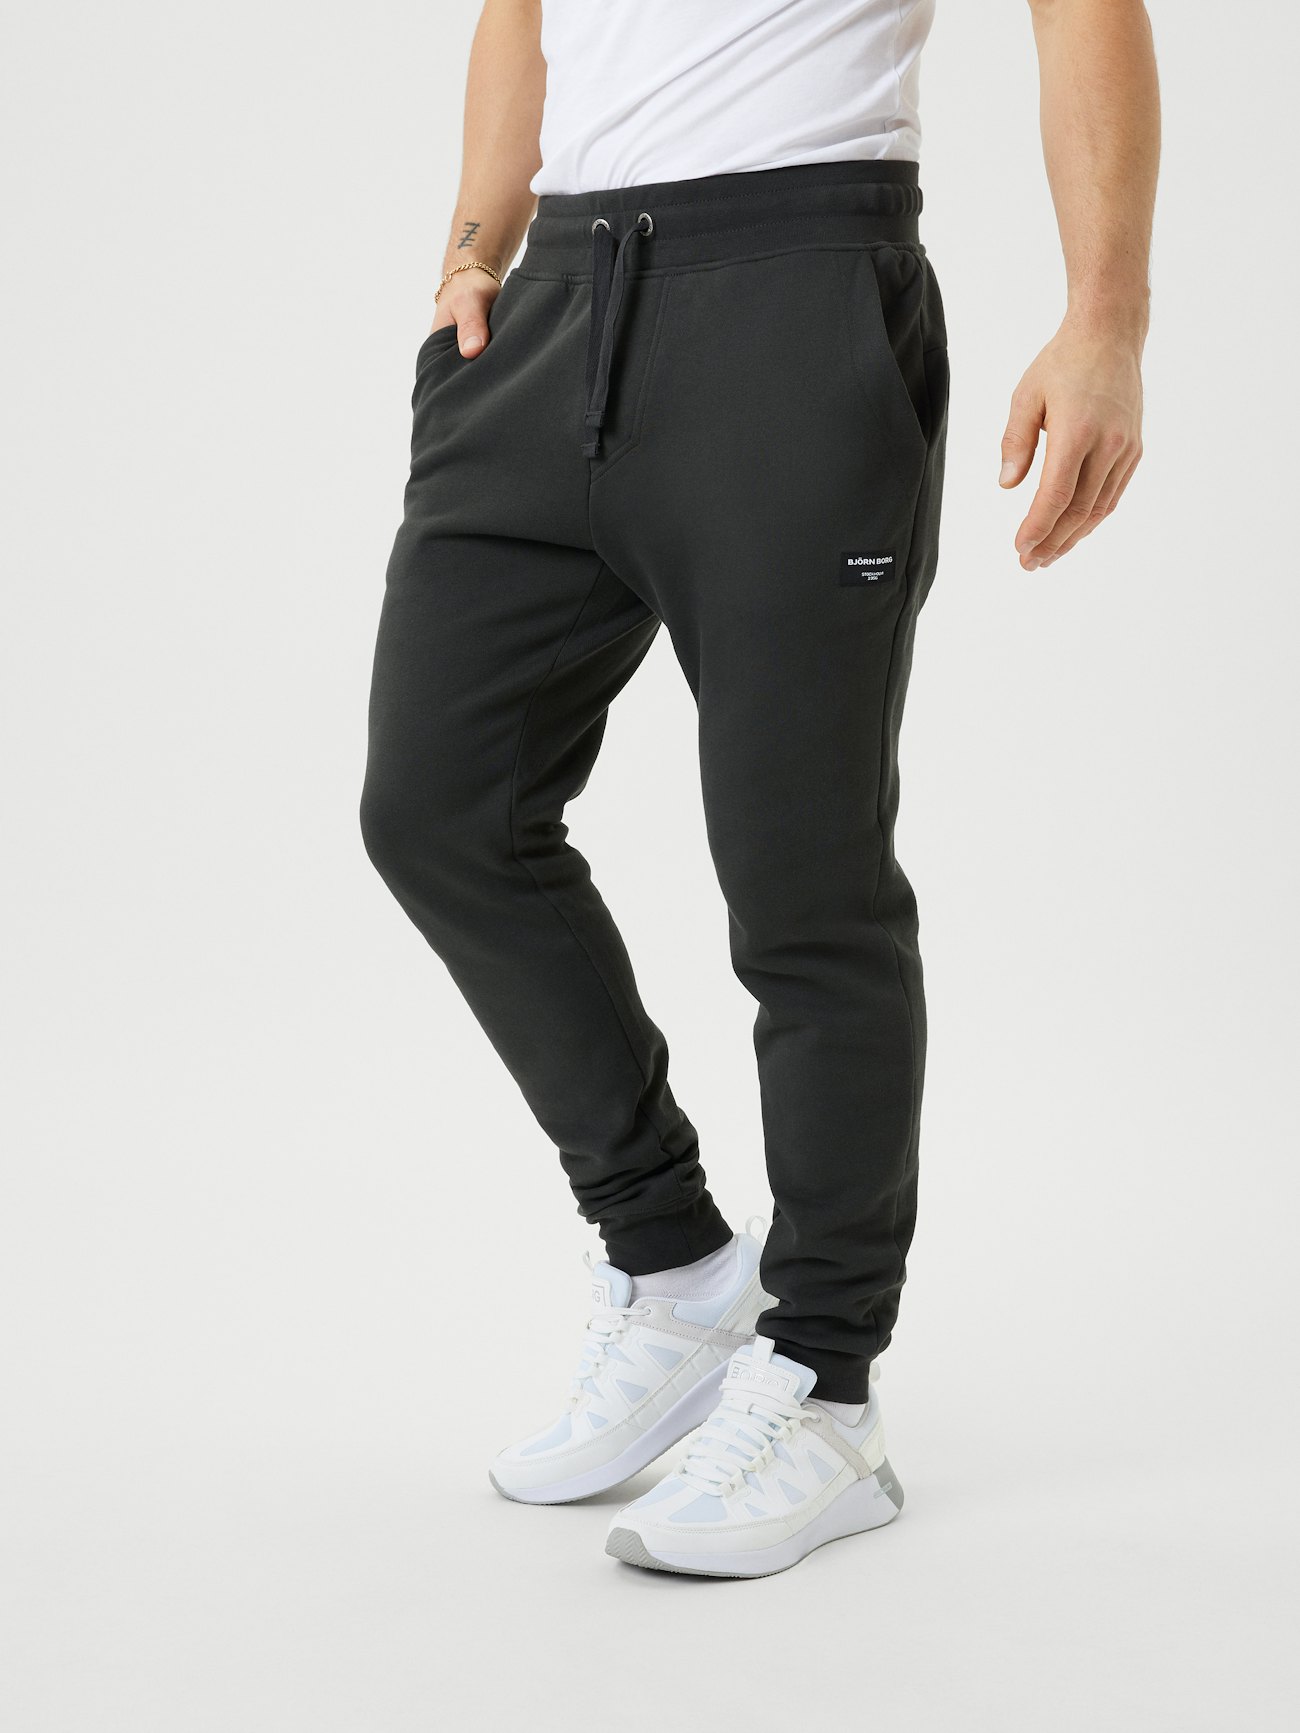 Centre Tapered Pants - Peat